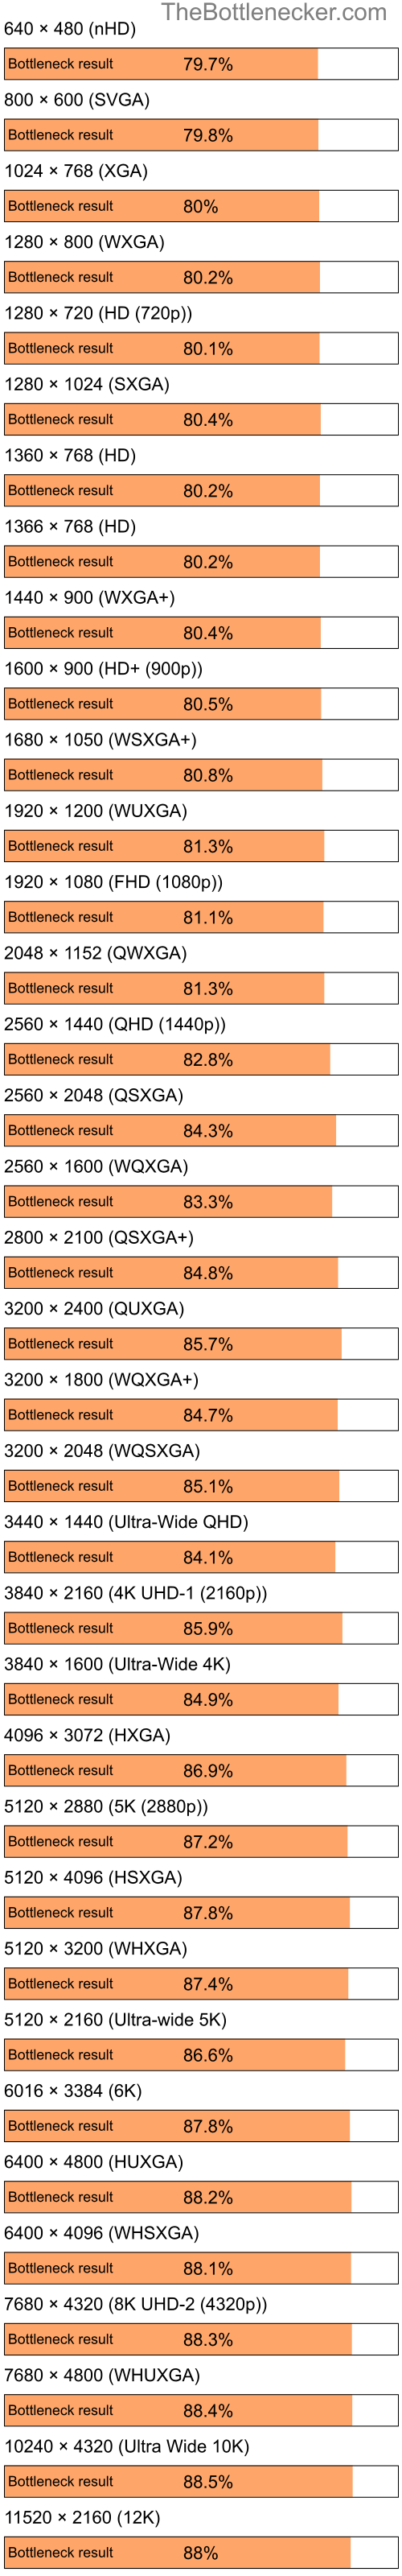 Bottleneck results by resolution for Intel Pentium 4 and NVIDIA GeForce Go 7200 in Graphic Card Intense Tasks